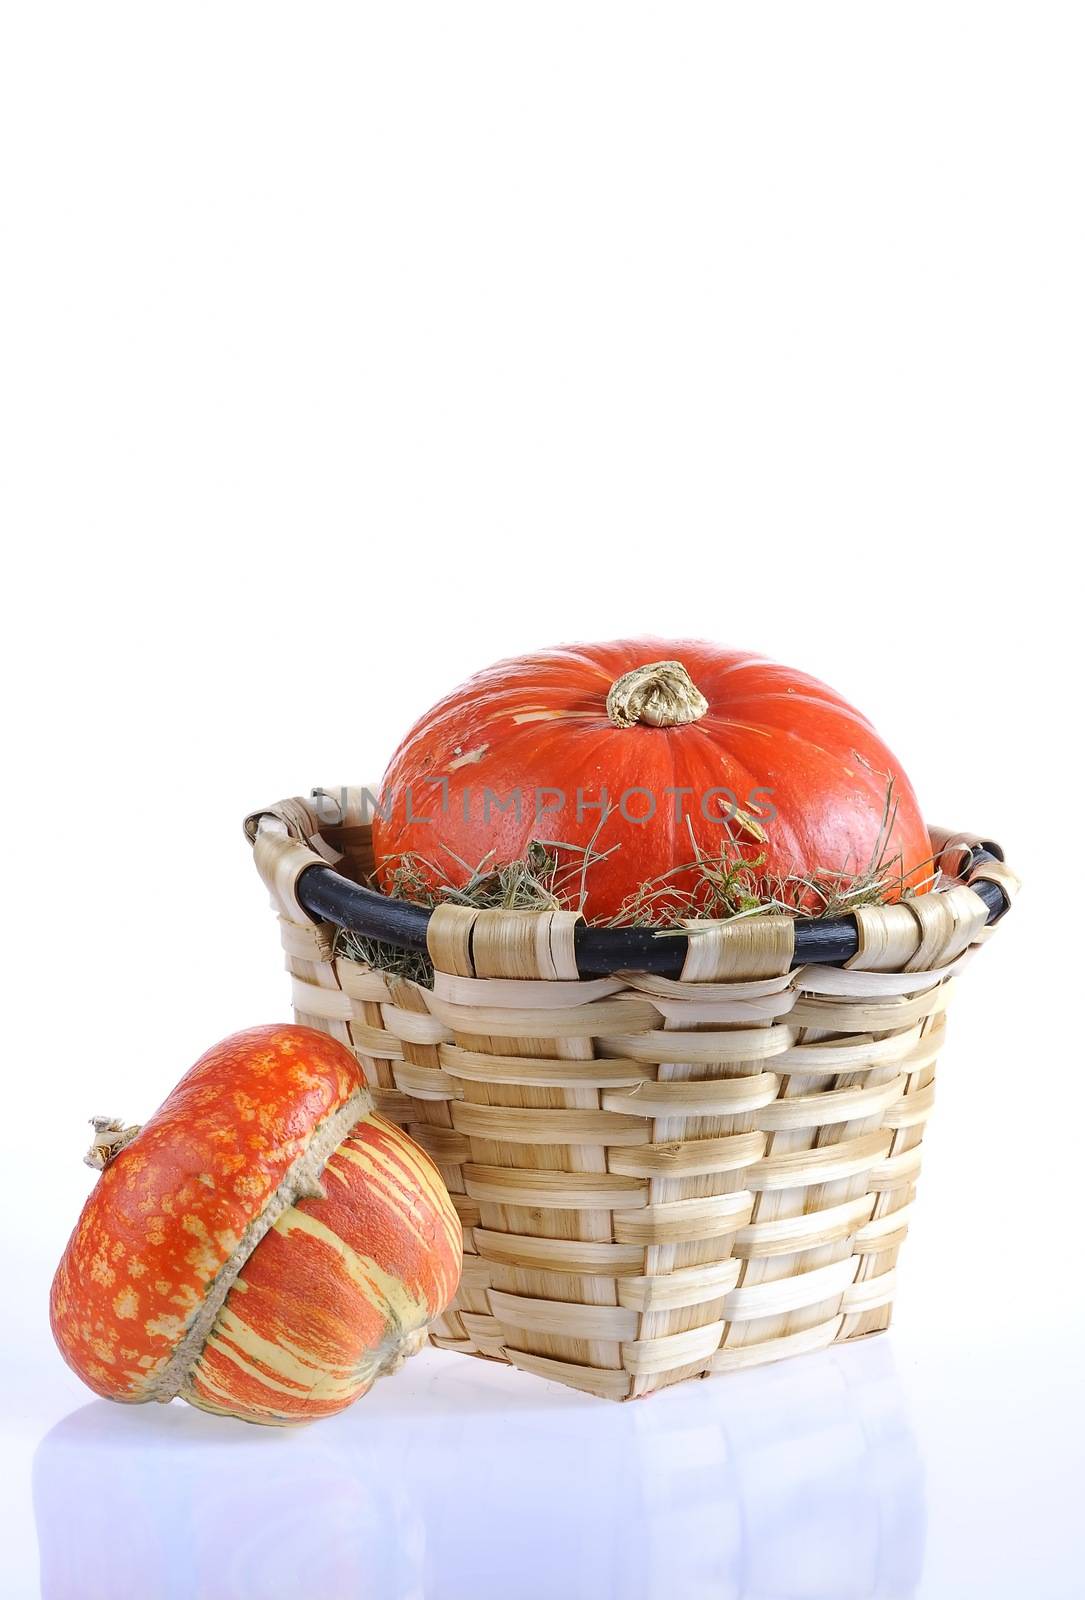 Different pumpkins in a basket with white background.